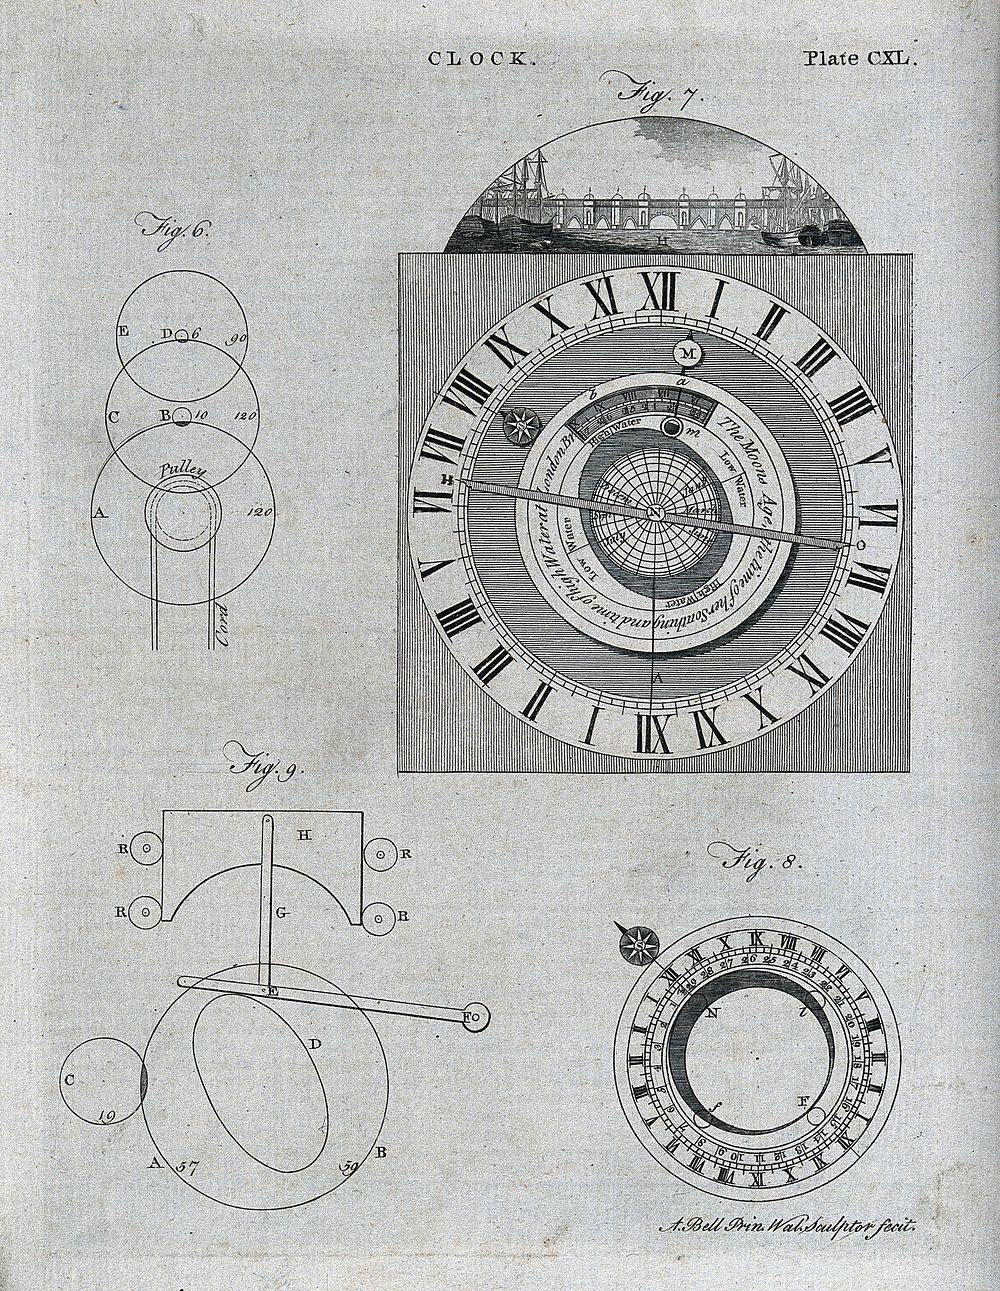 Clocks: a Ferguson clock, face (right), and diagrams of the mechanism (left). Engraving by A. Bell.